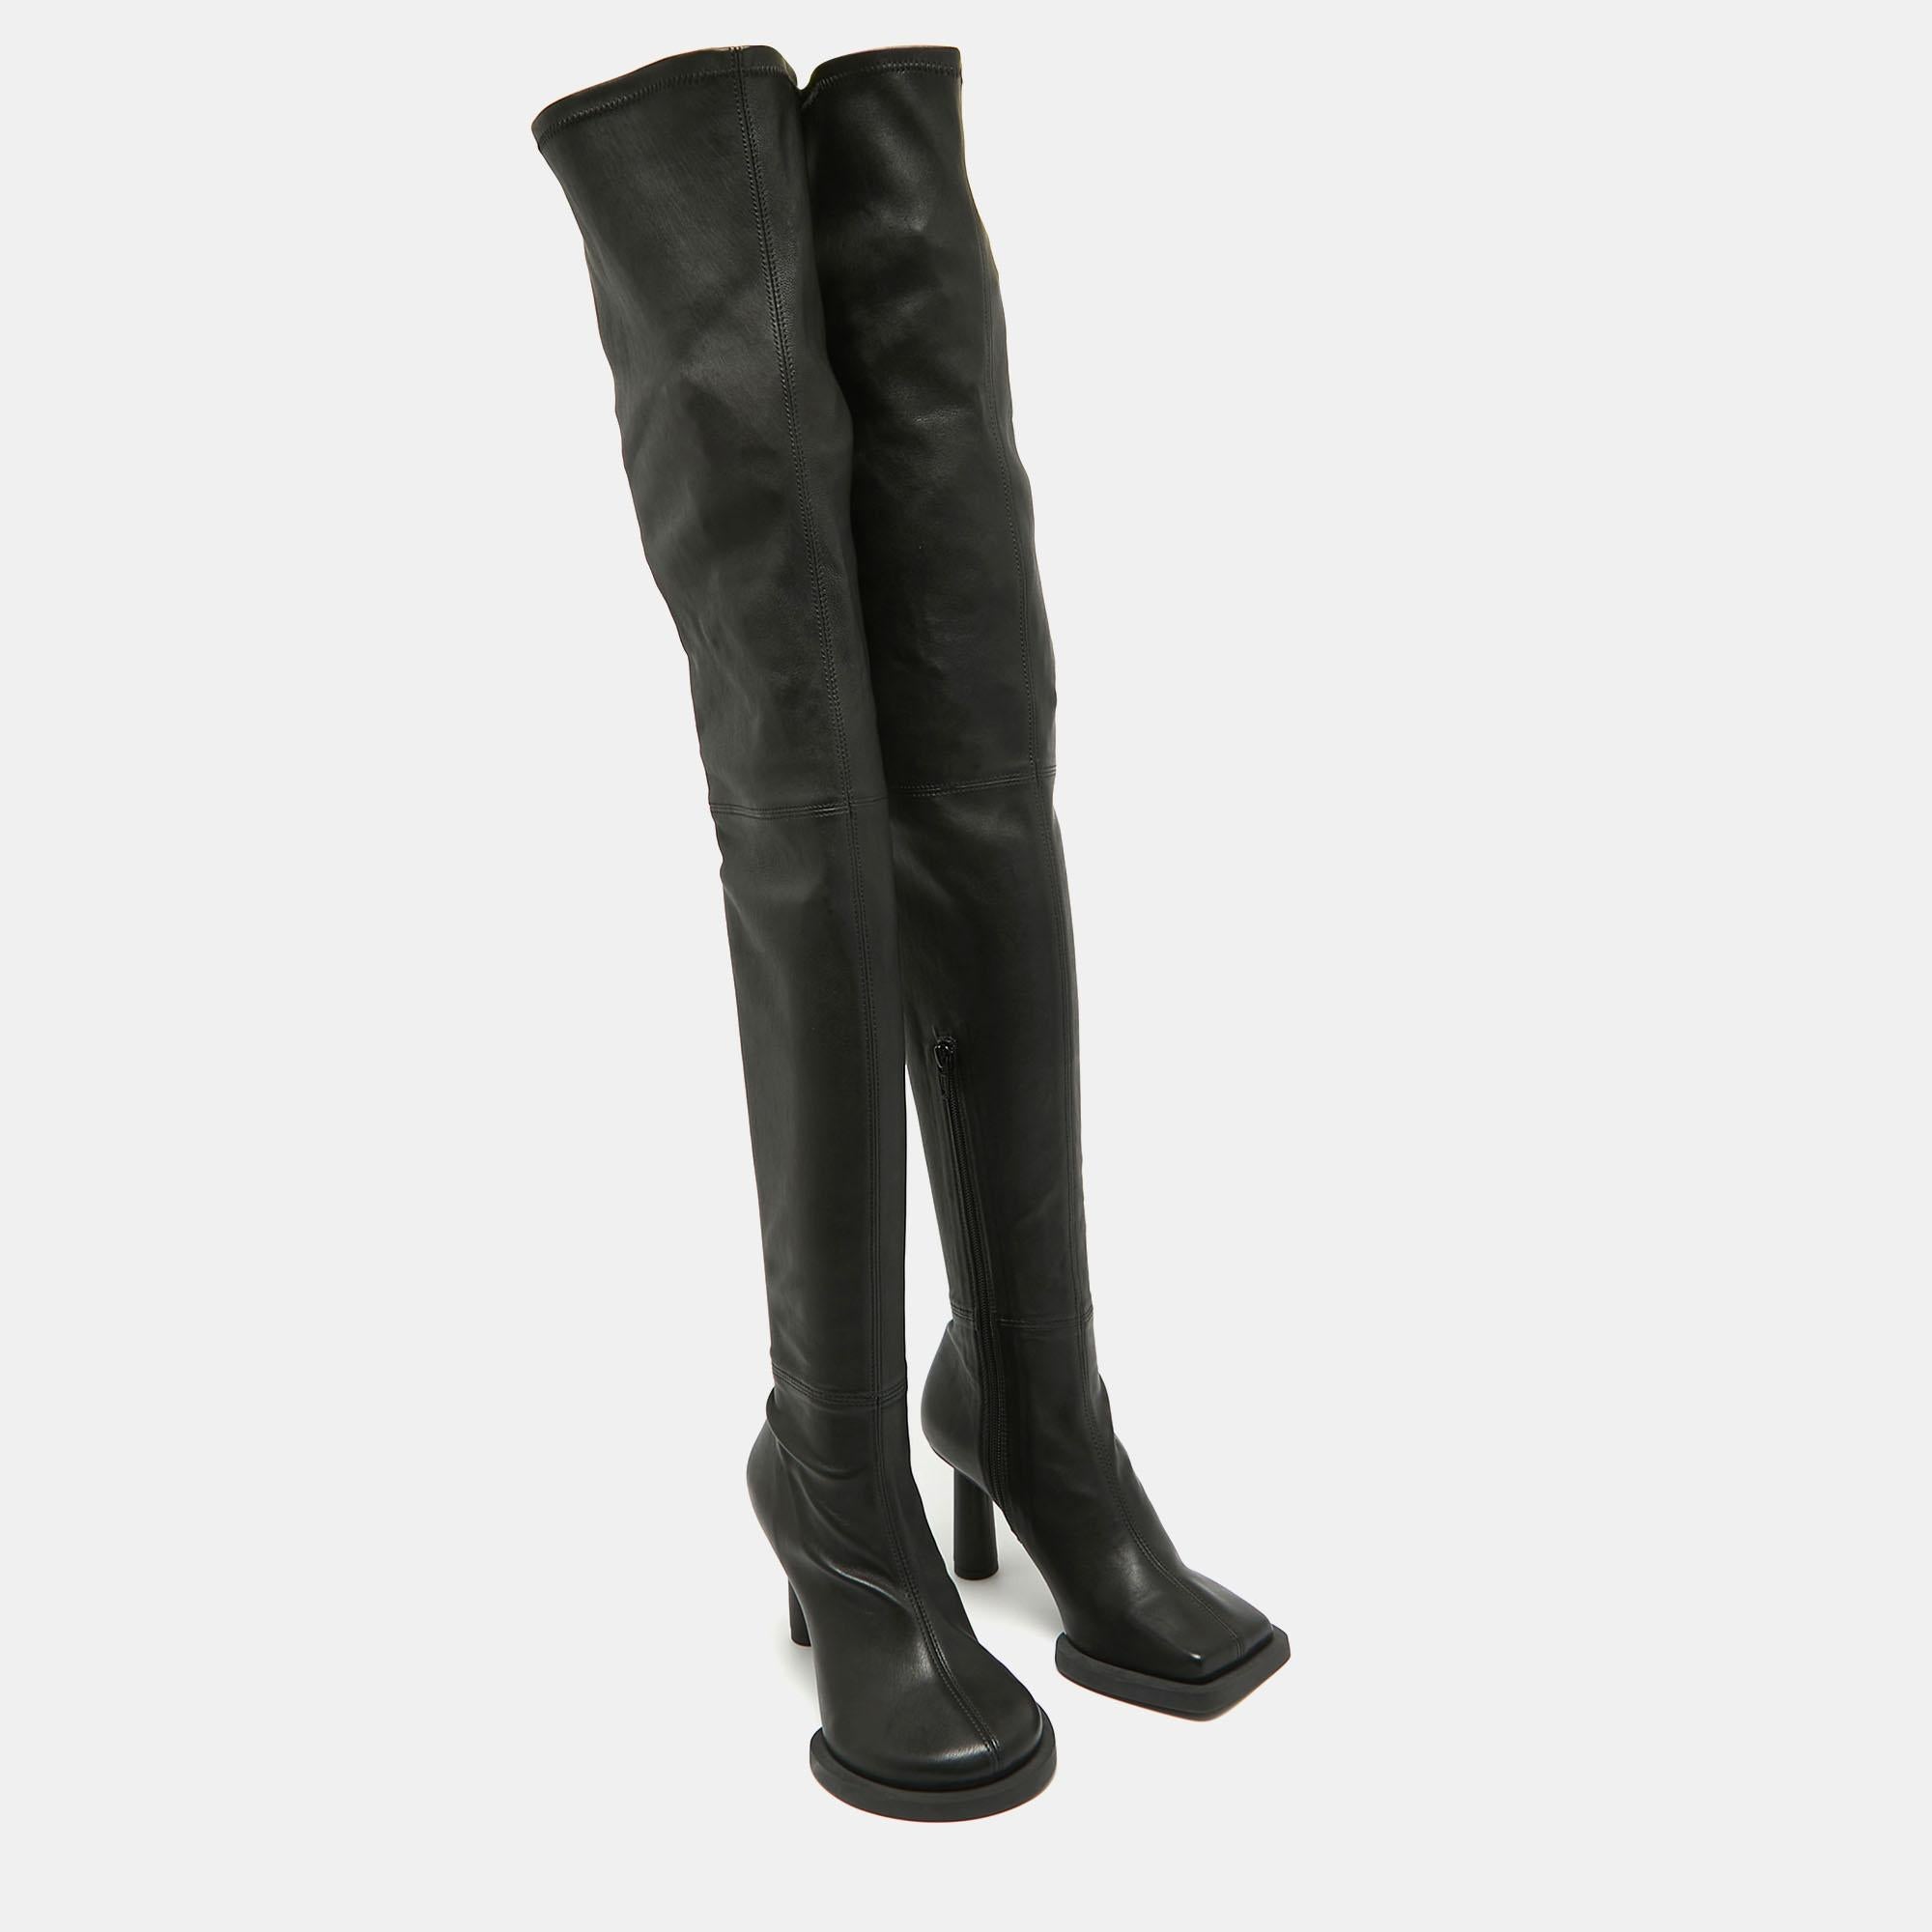 Jacquemus Black Leather Over The Knee Boots Size 36 In Good Condition For Sale In Dubai, Al Qouz 2